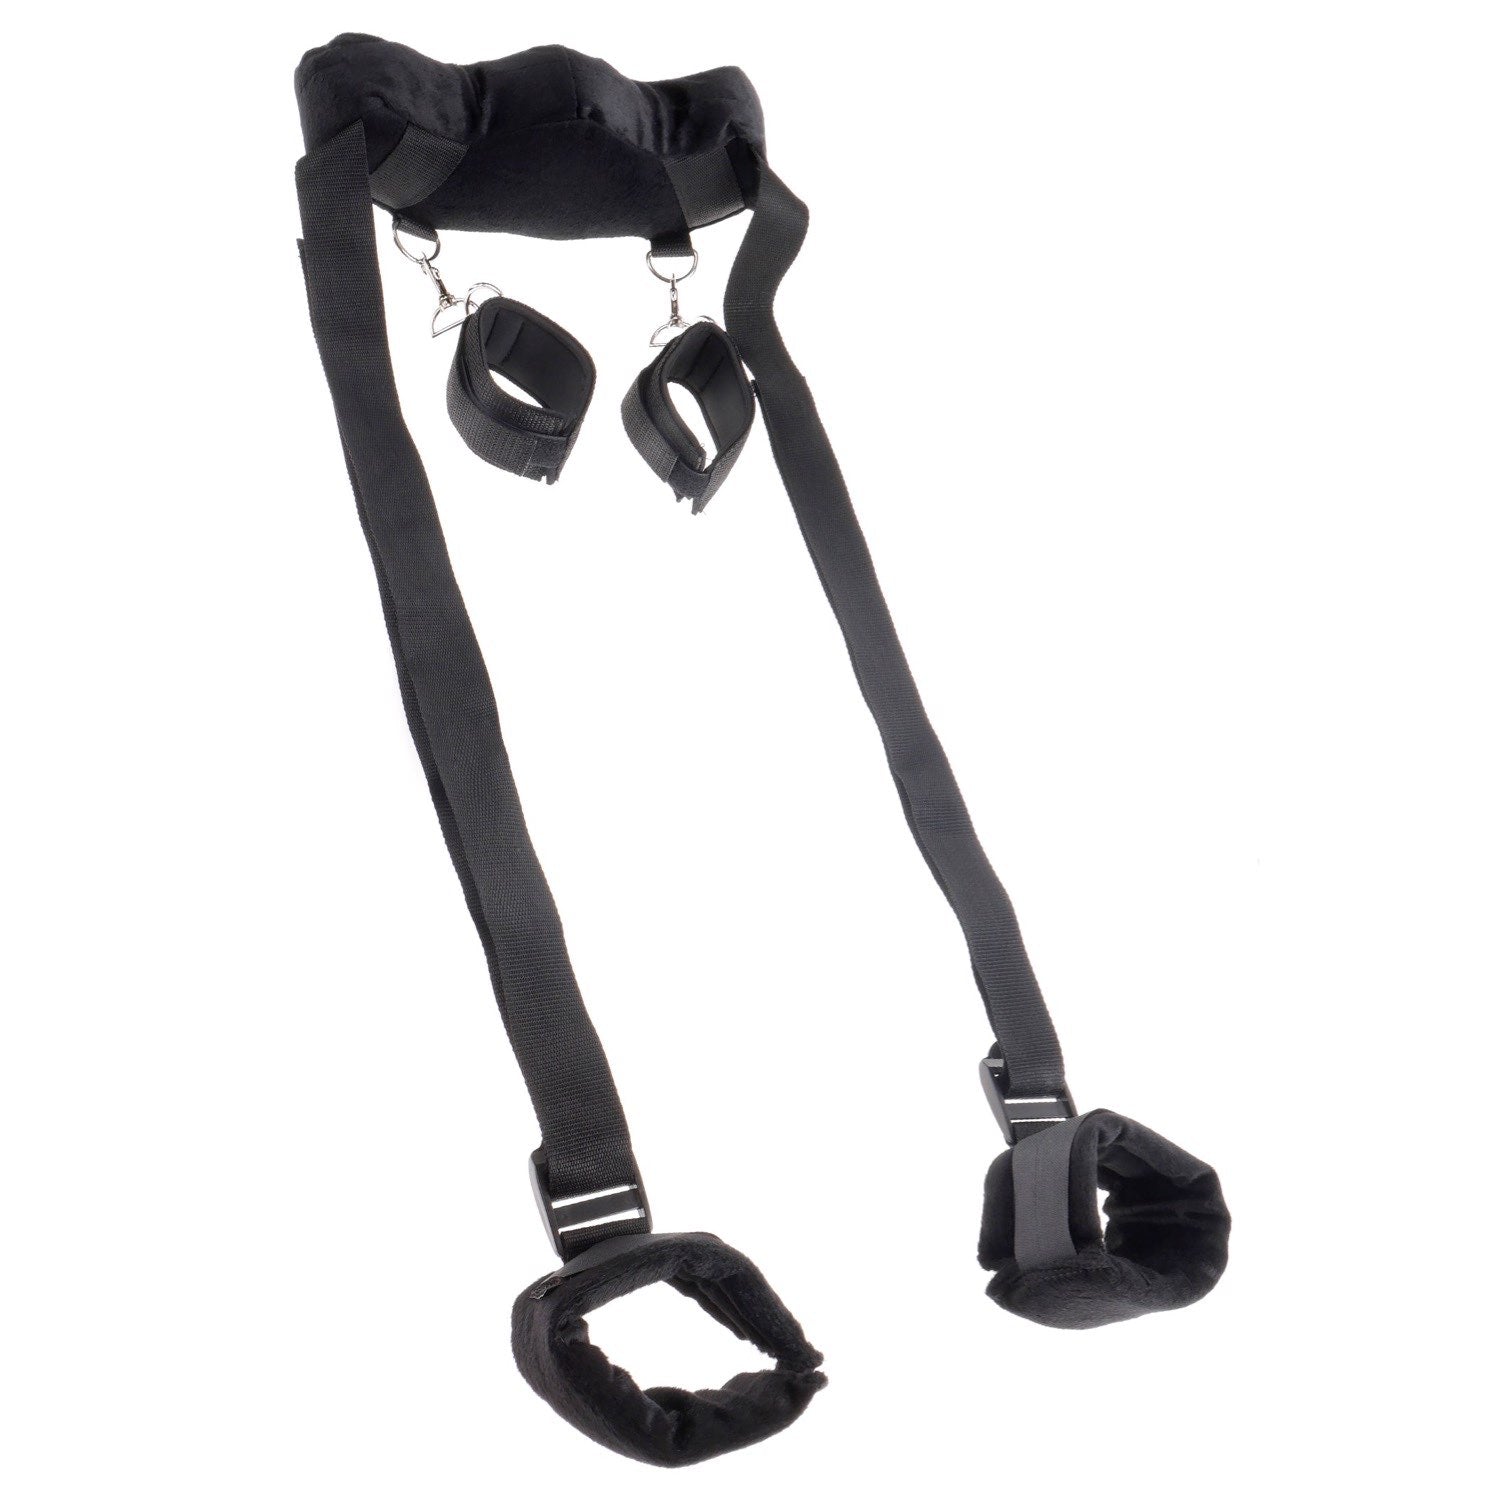 Fetish Fantasy Series Position Master With Cuffs - Restraint Set by Pipedream